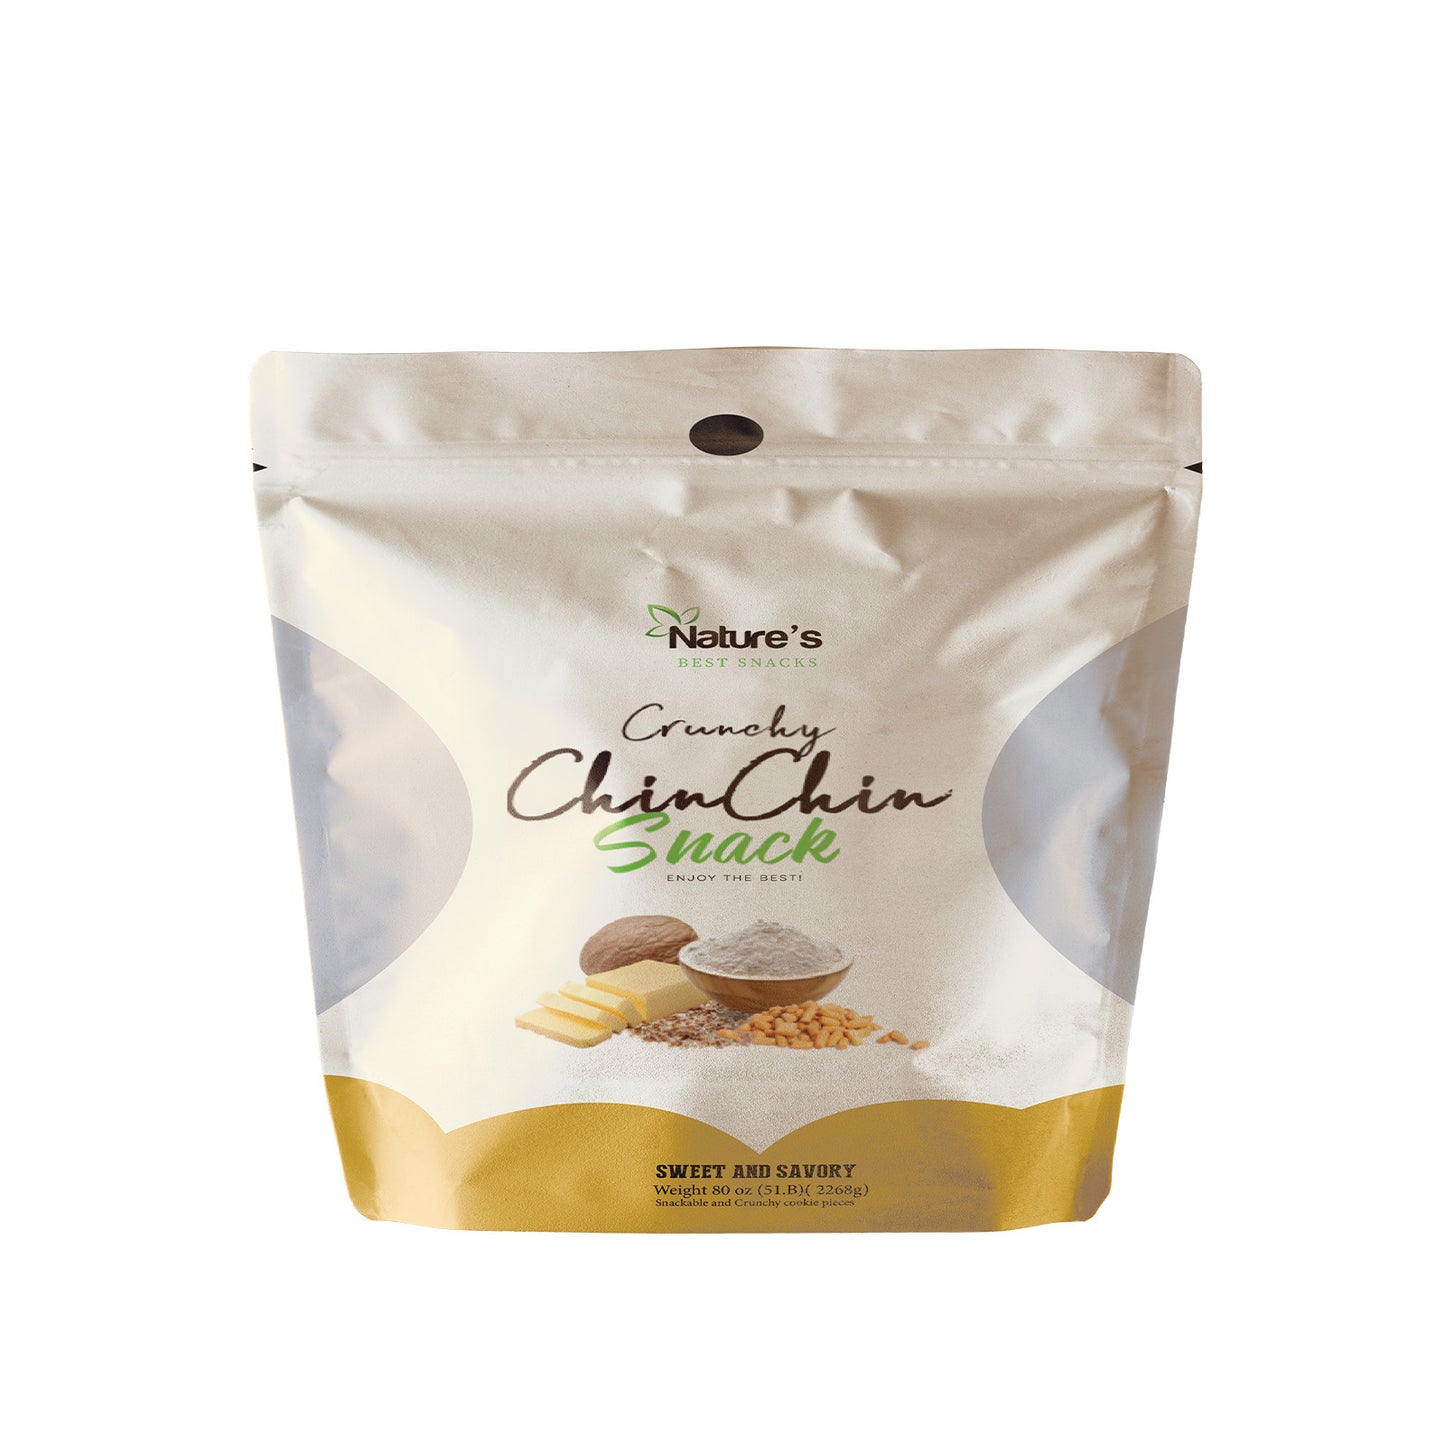 Chin Chin Snack (5lbs) - Family Size